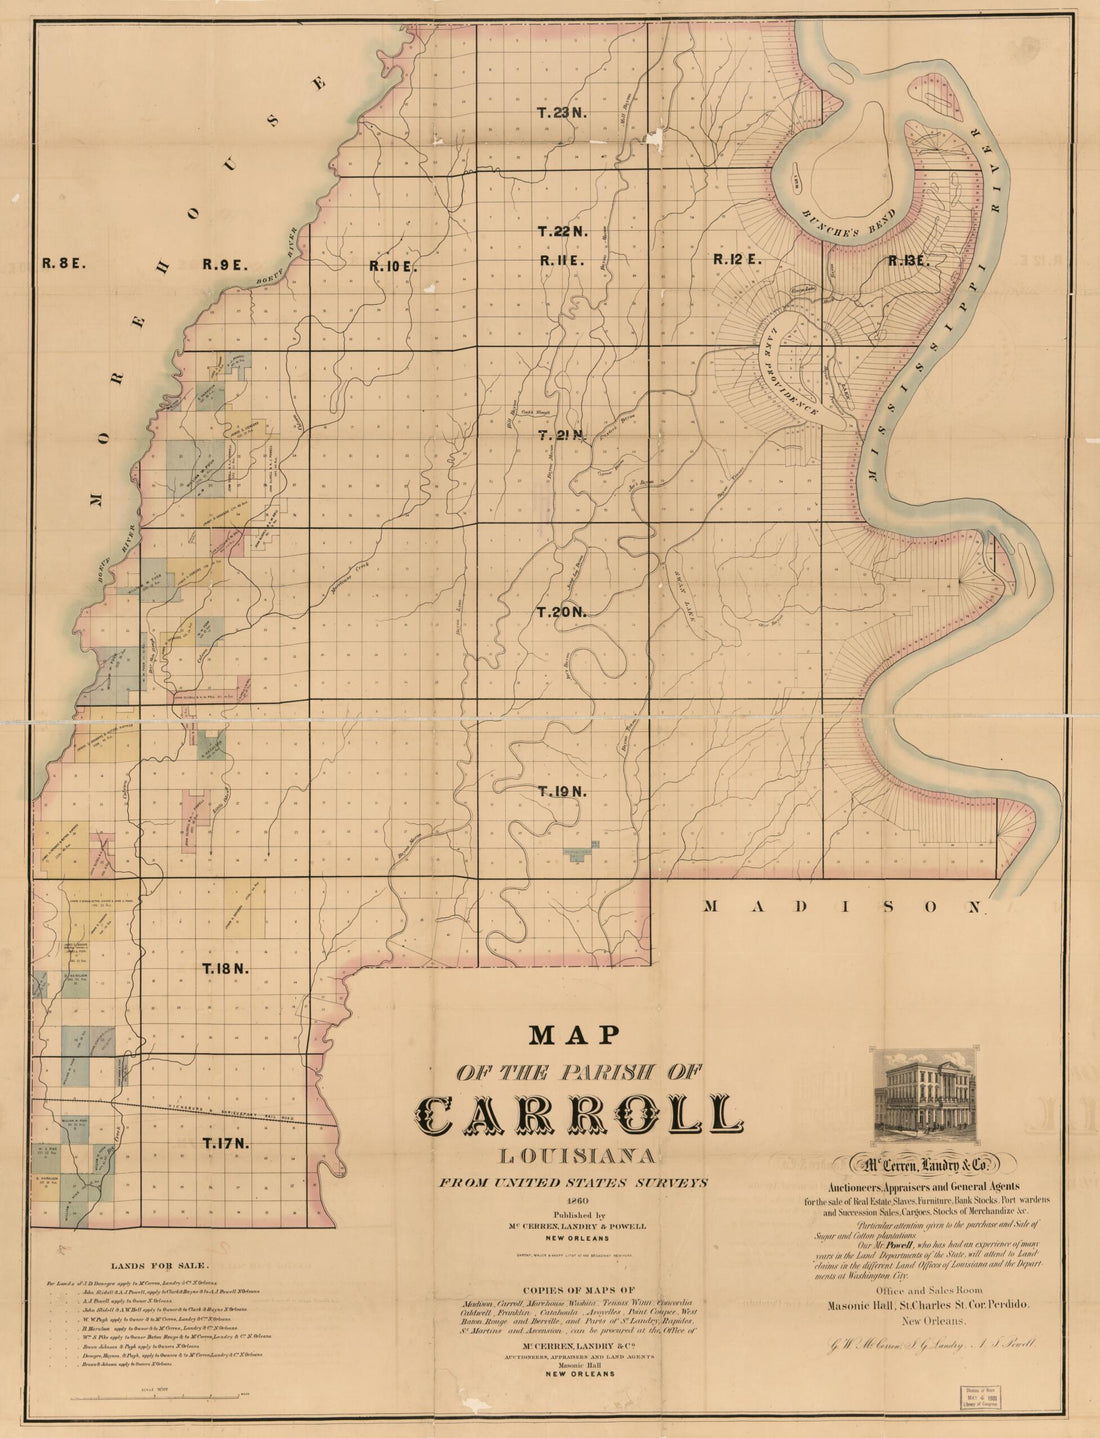 This old map of Map of the Parish of Carroll, Louisiana : from the United States Surveys from 1860 was created by Landry &amp; Powell McCerren in 1860